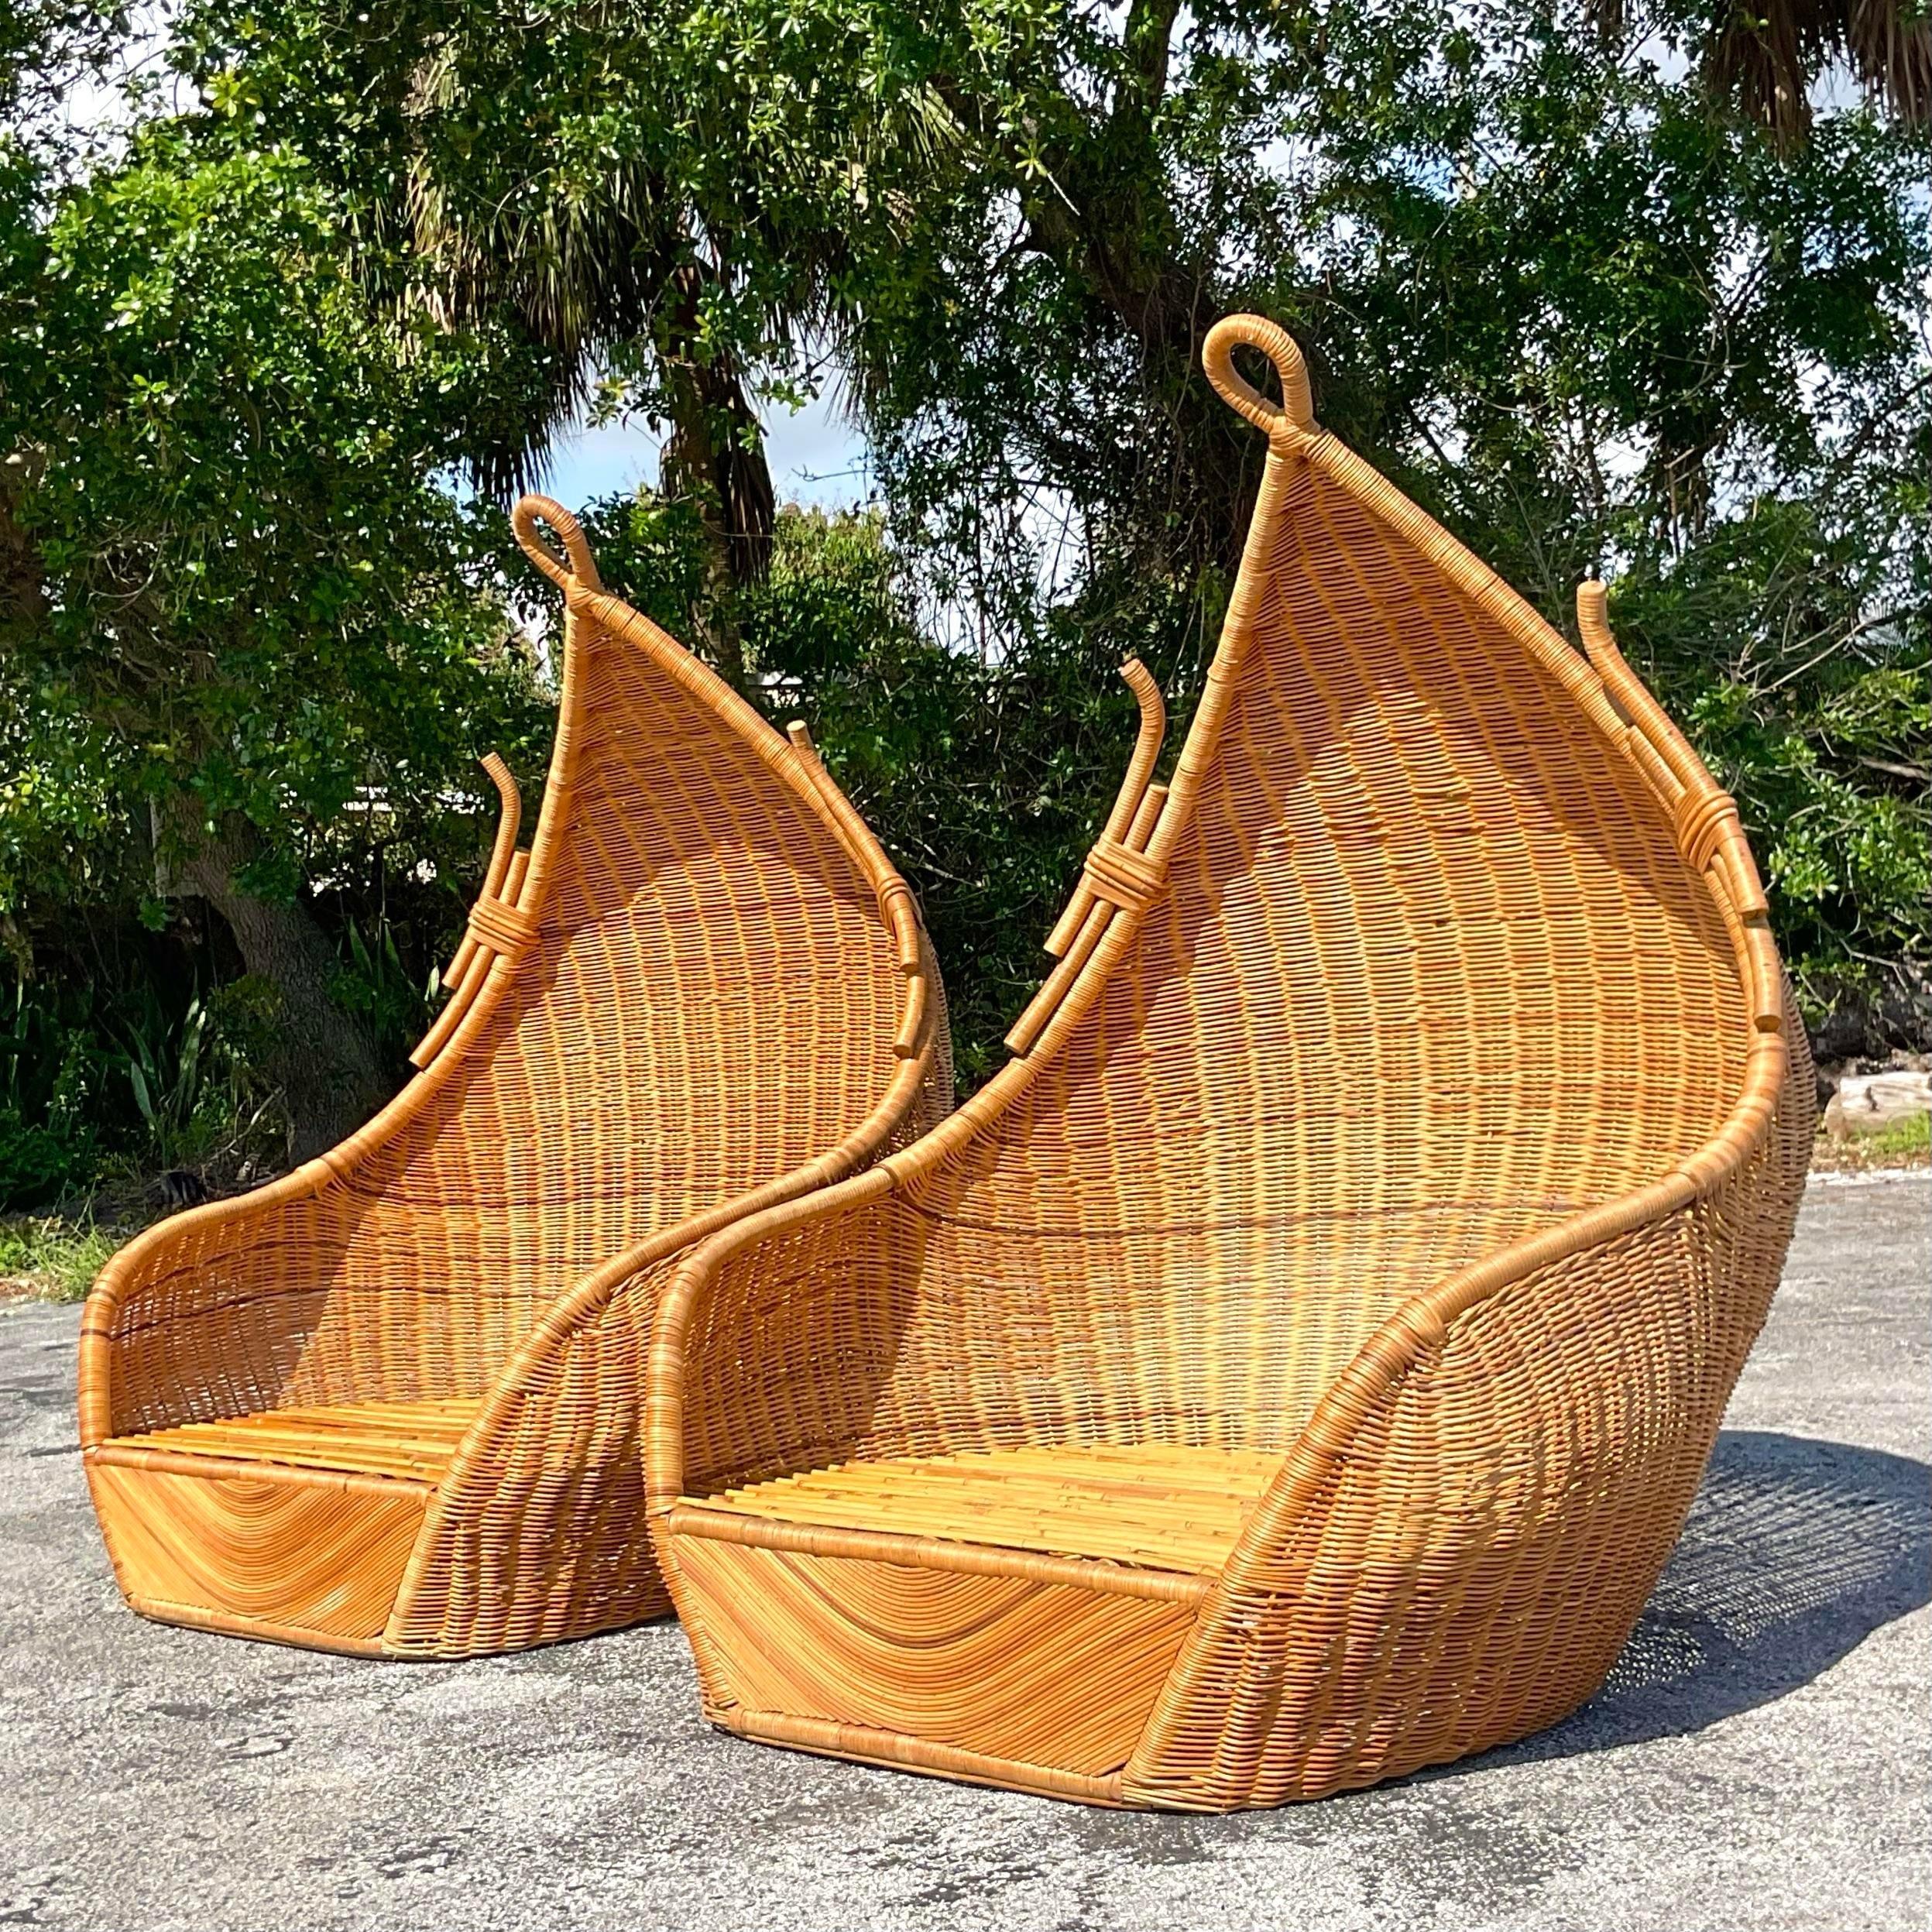 Philippine Vintage Coastal Woven Rattan Hooded Lounge Chairs - a Pair For Sale